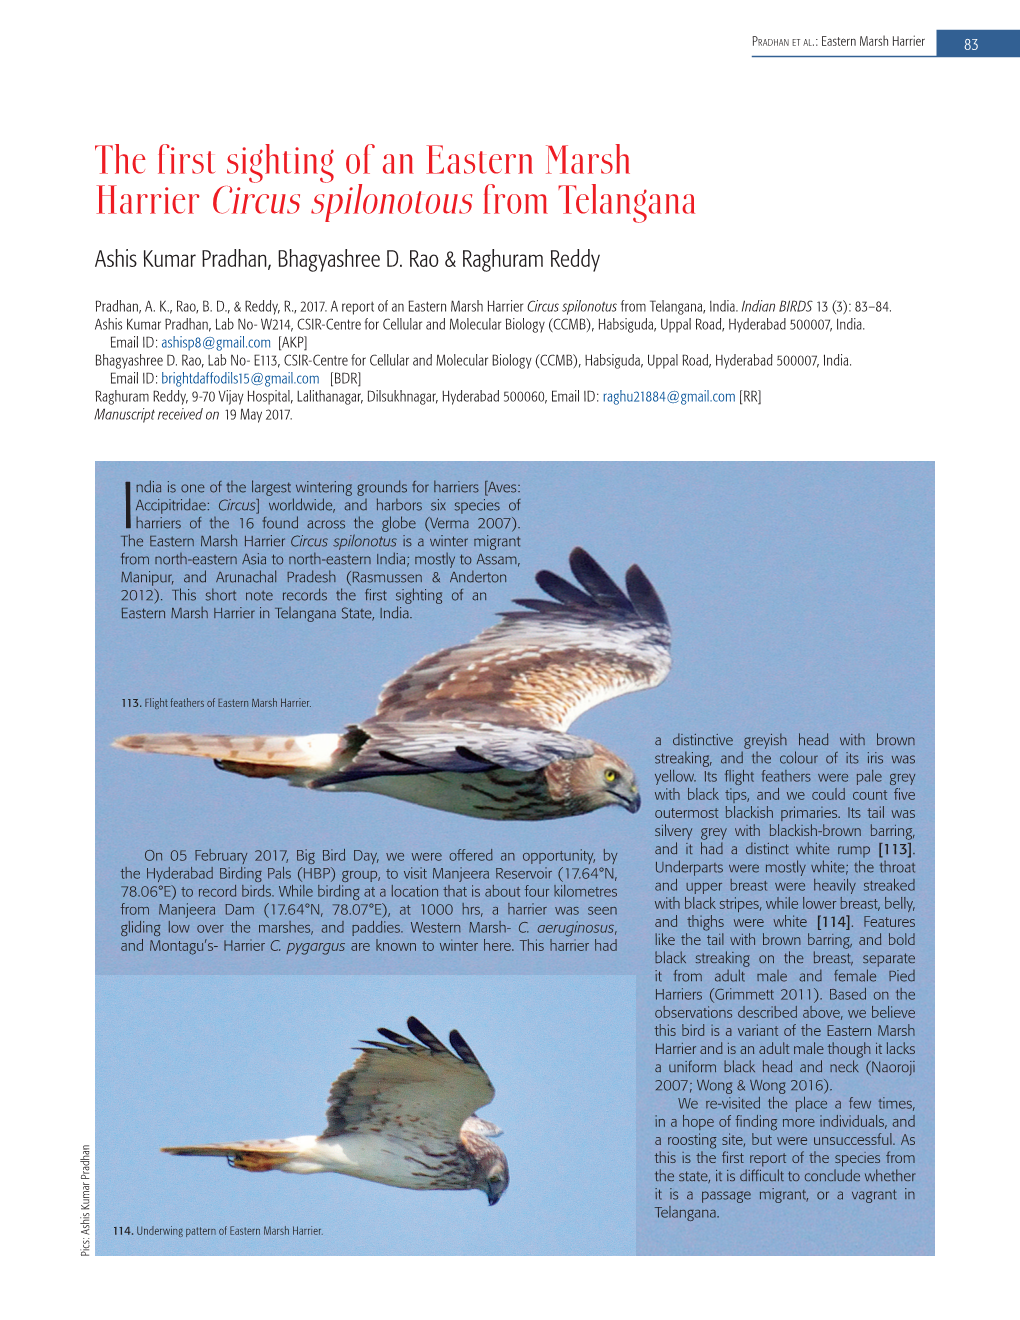 The First Sighting of an Eastern Marsh Harrier Circus Spilonotous from Telangana